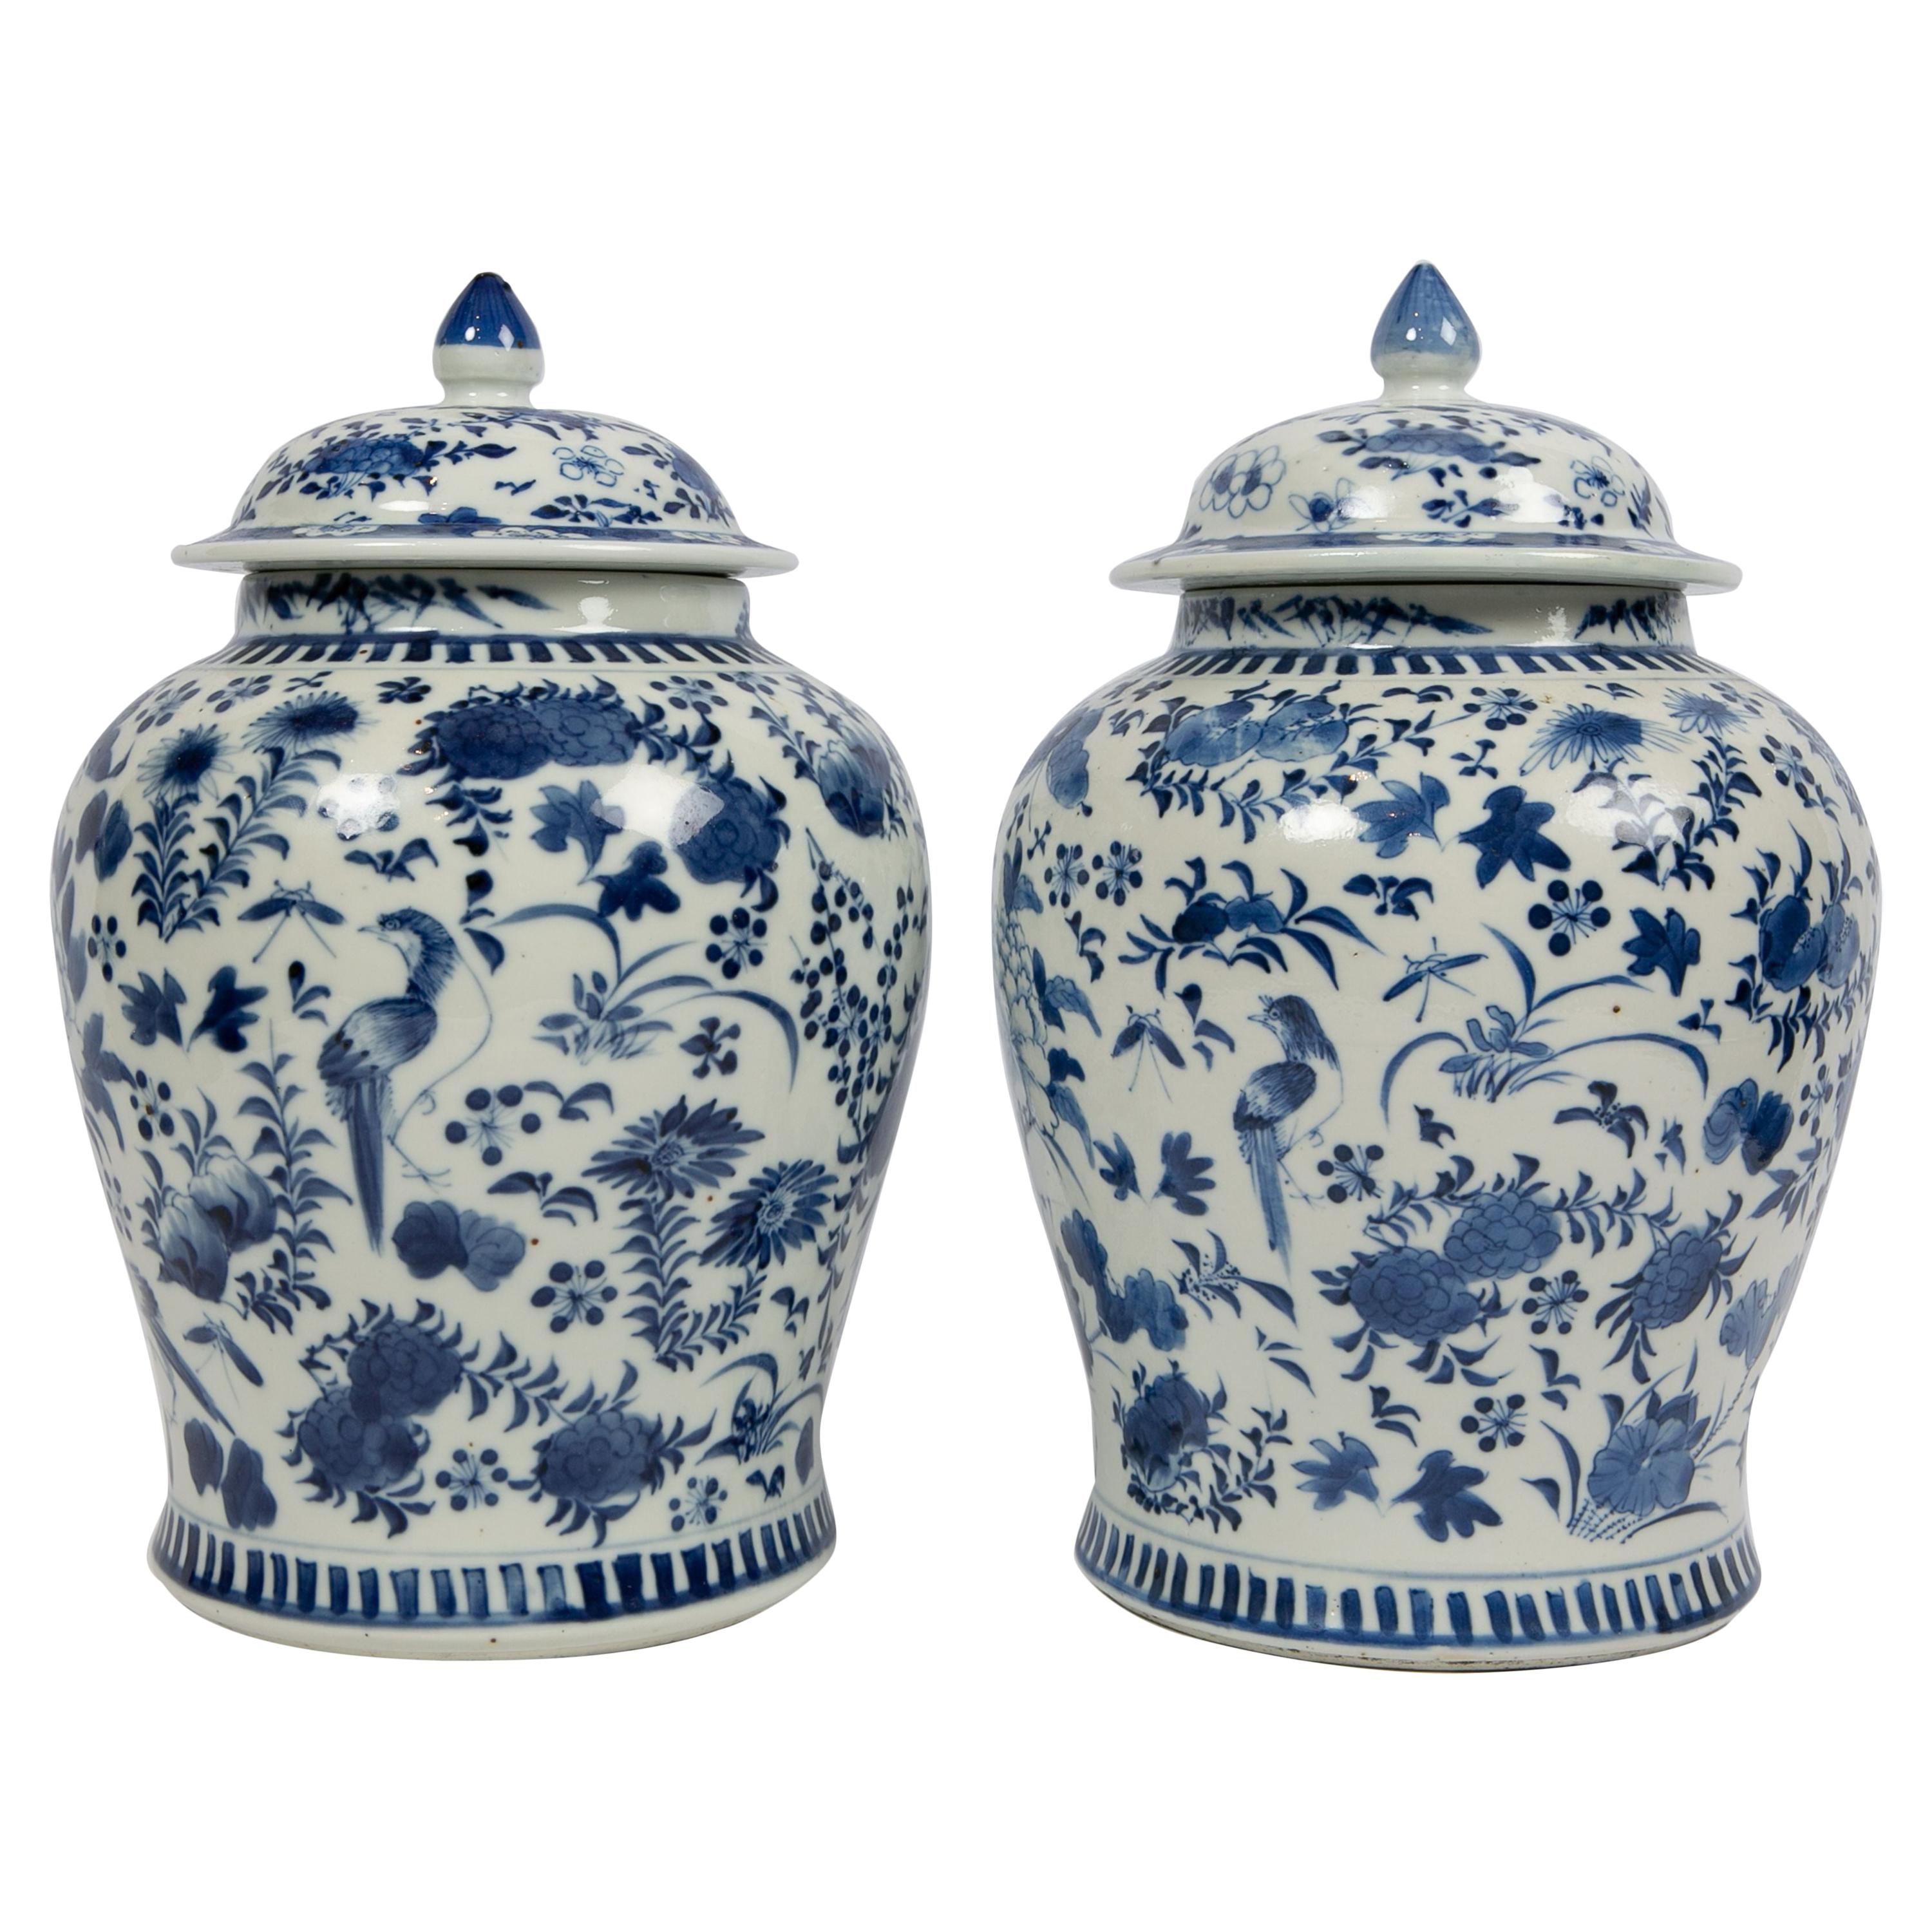 Pair of Chinese Porcelain Blue and White Covered Jars 19th Century Qing Dynasty